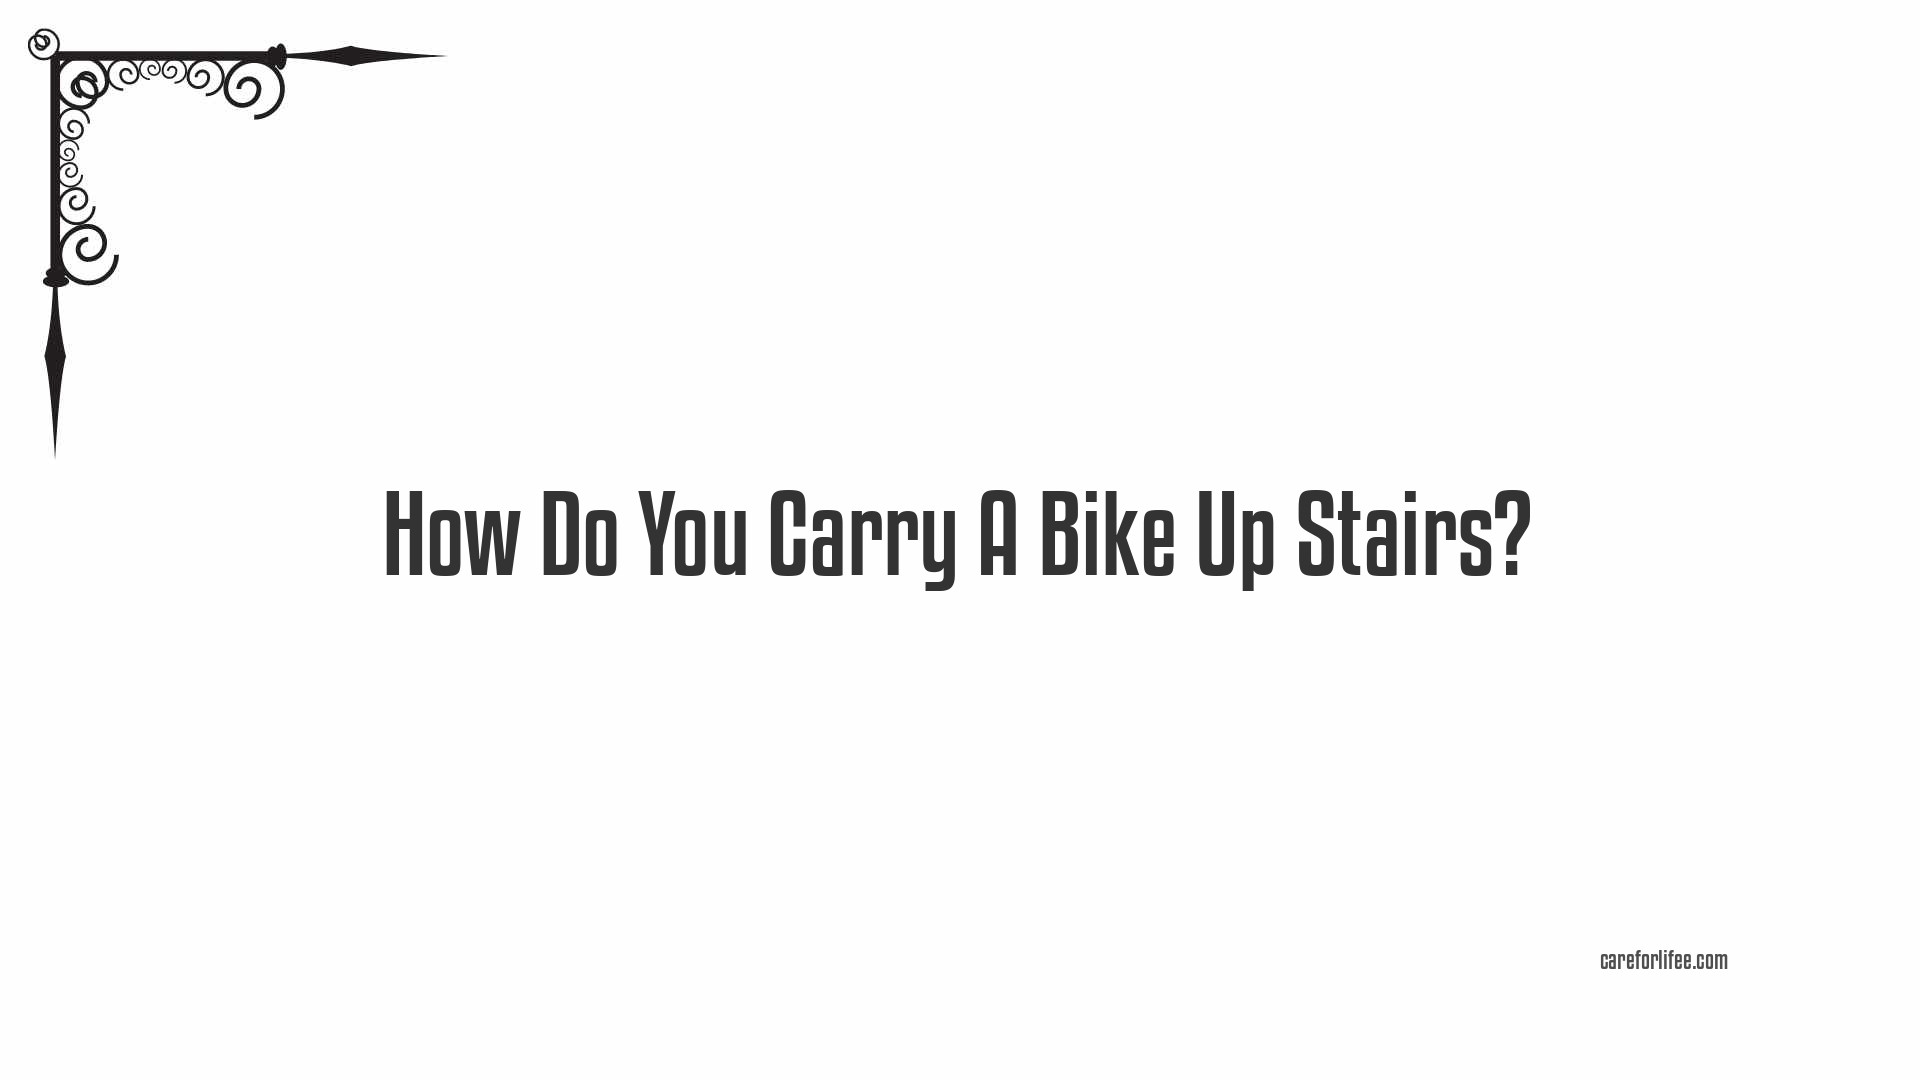 How Do You Carry A Bike Up Stairs?